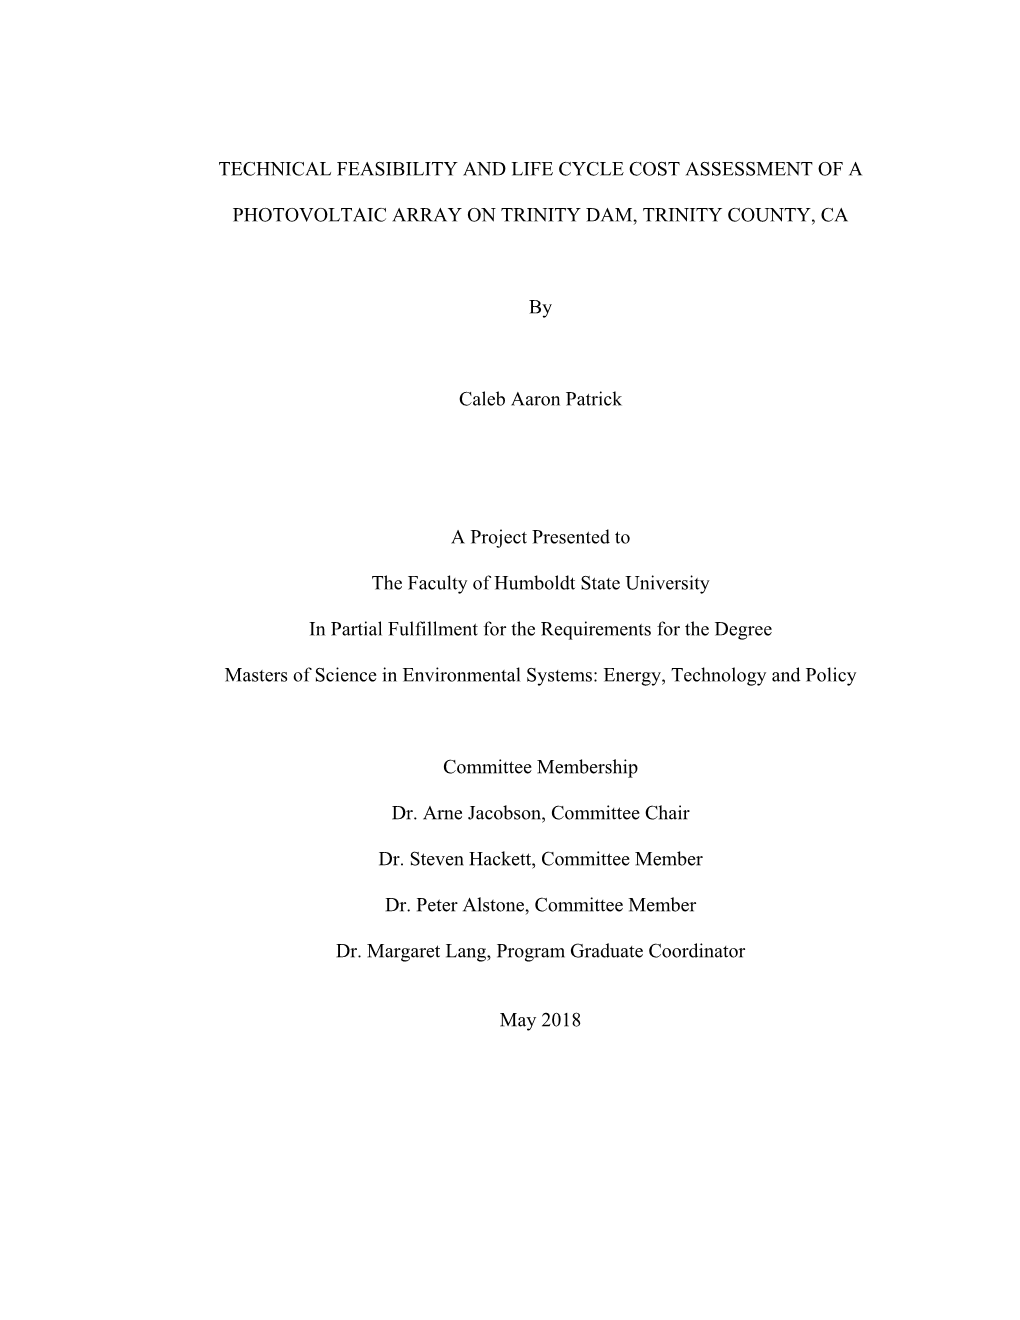 Technical Feasibility and Life Cycle Cost Assessment of a Photovoltaic Array on Trinity Dam, Trinity County, Ca